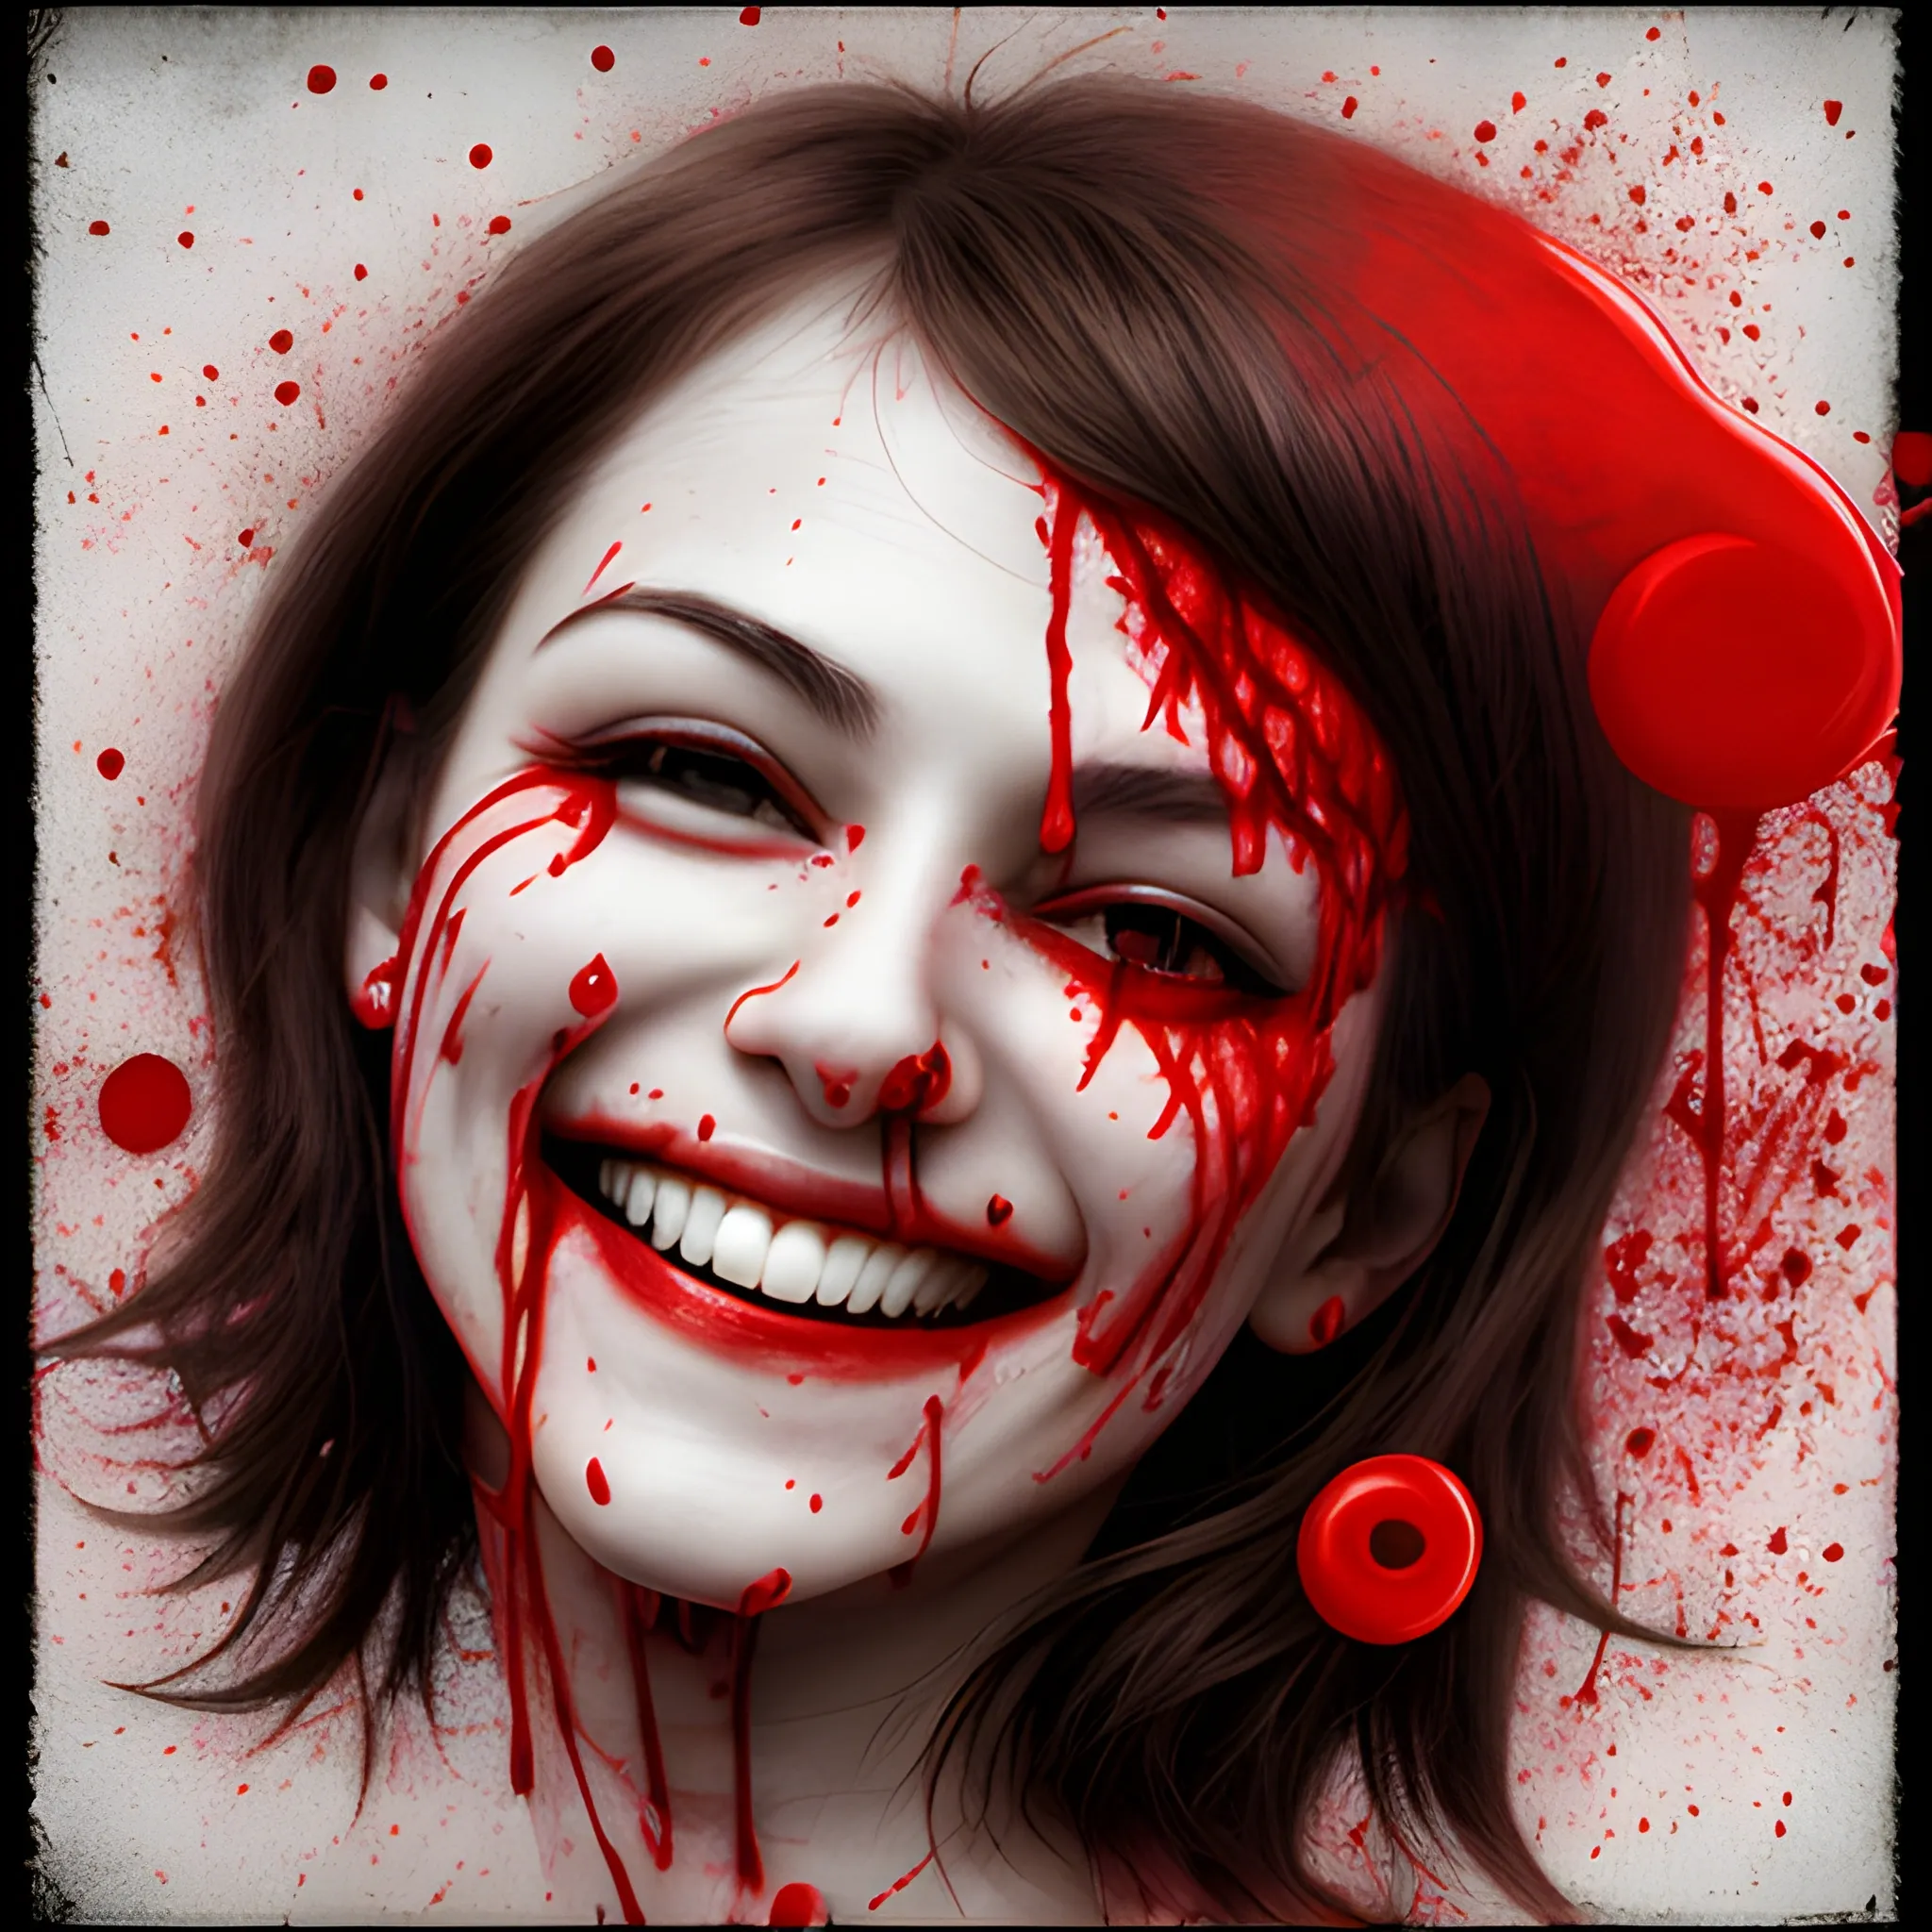 smile with blood
